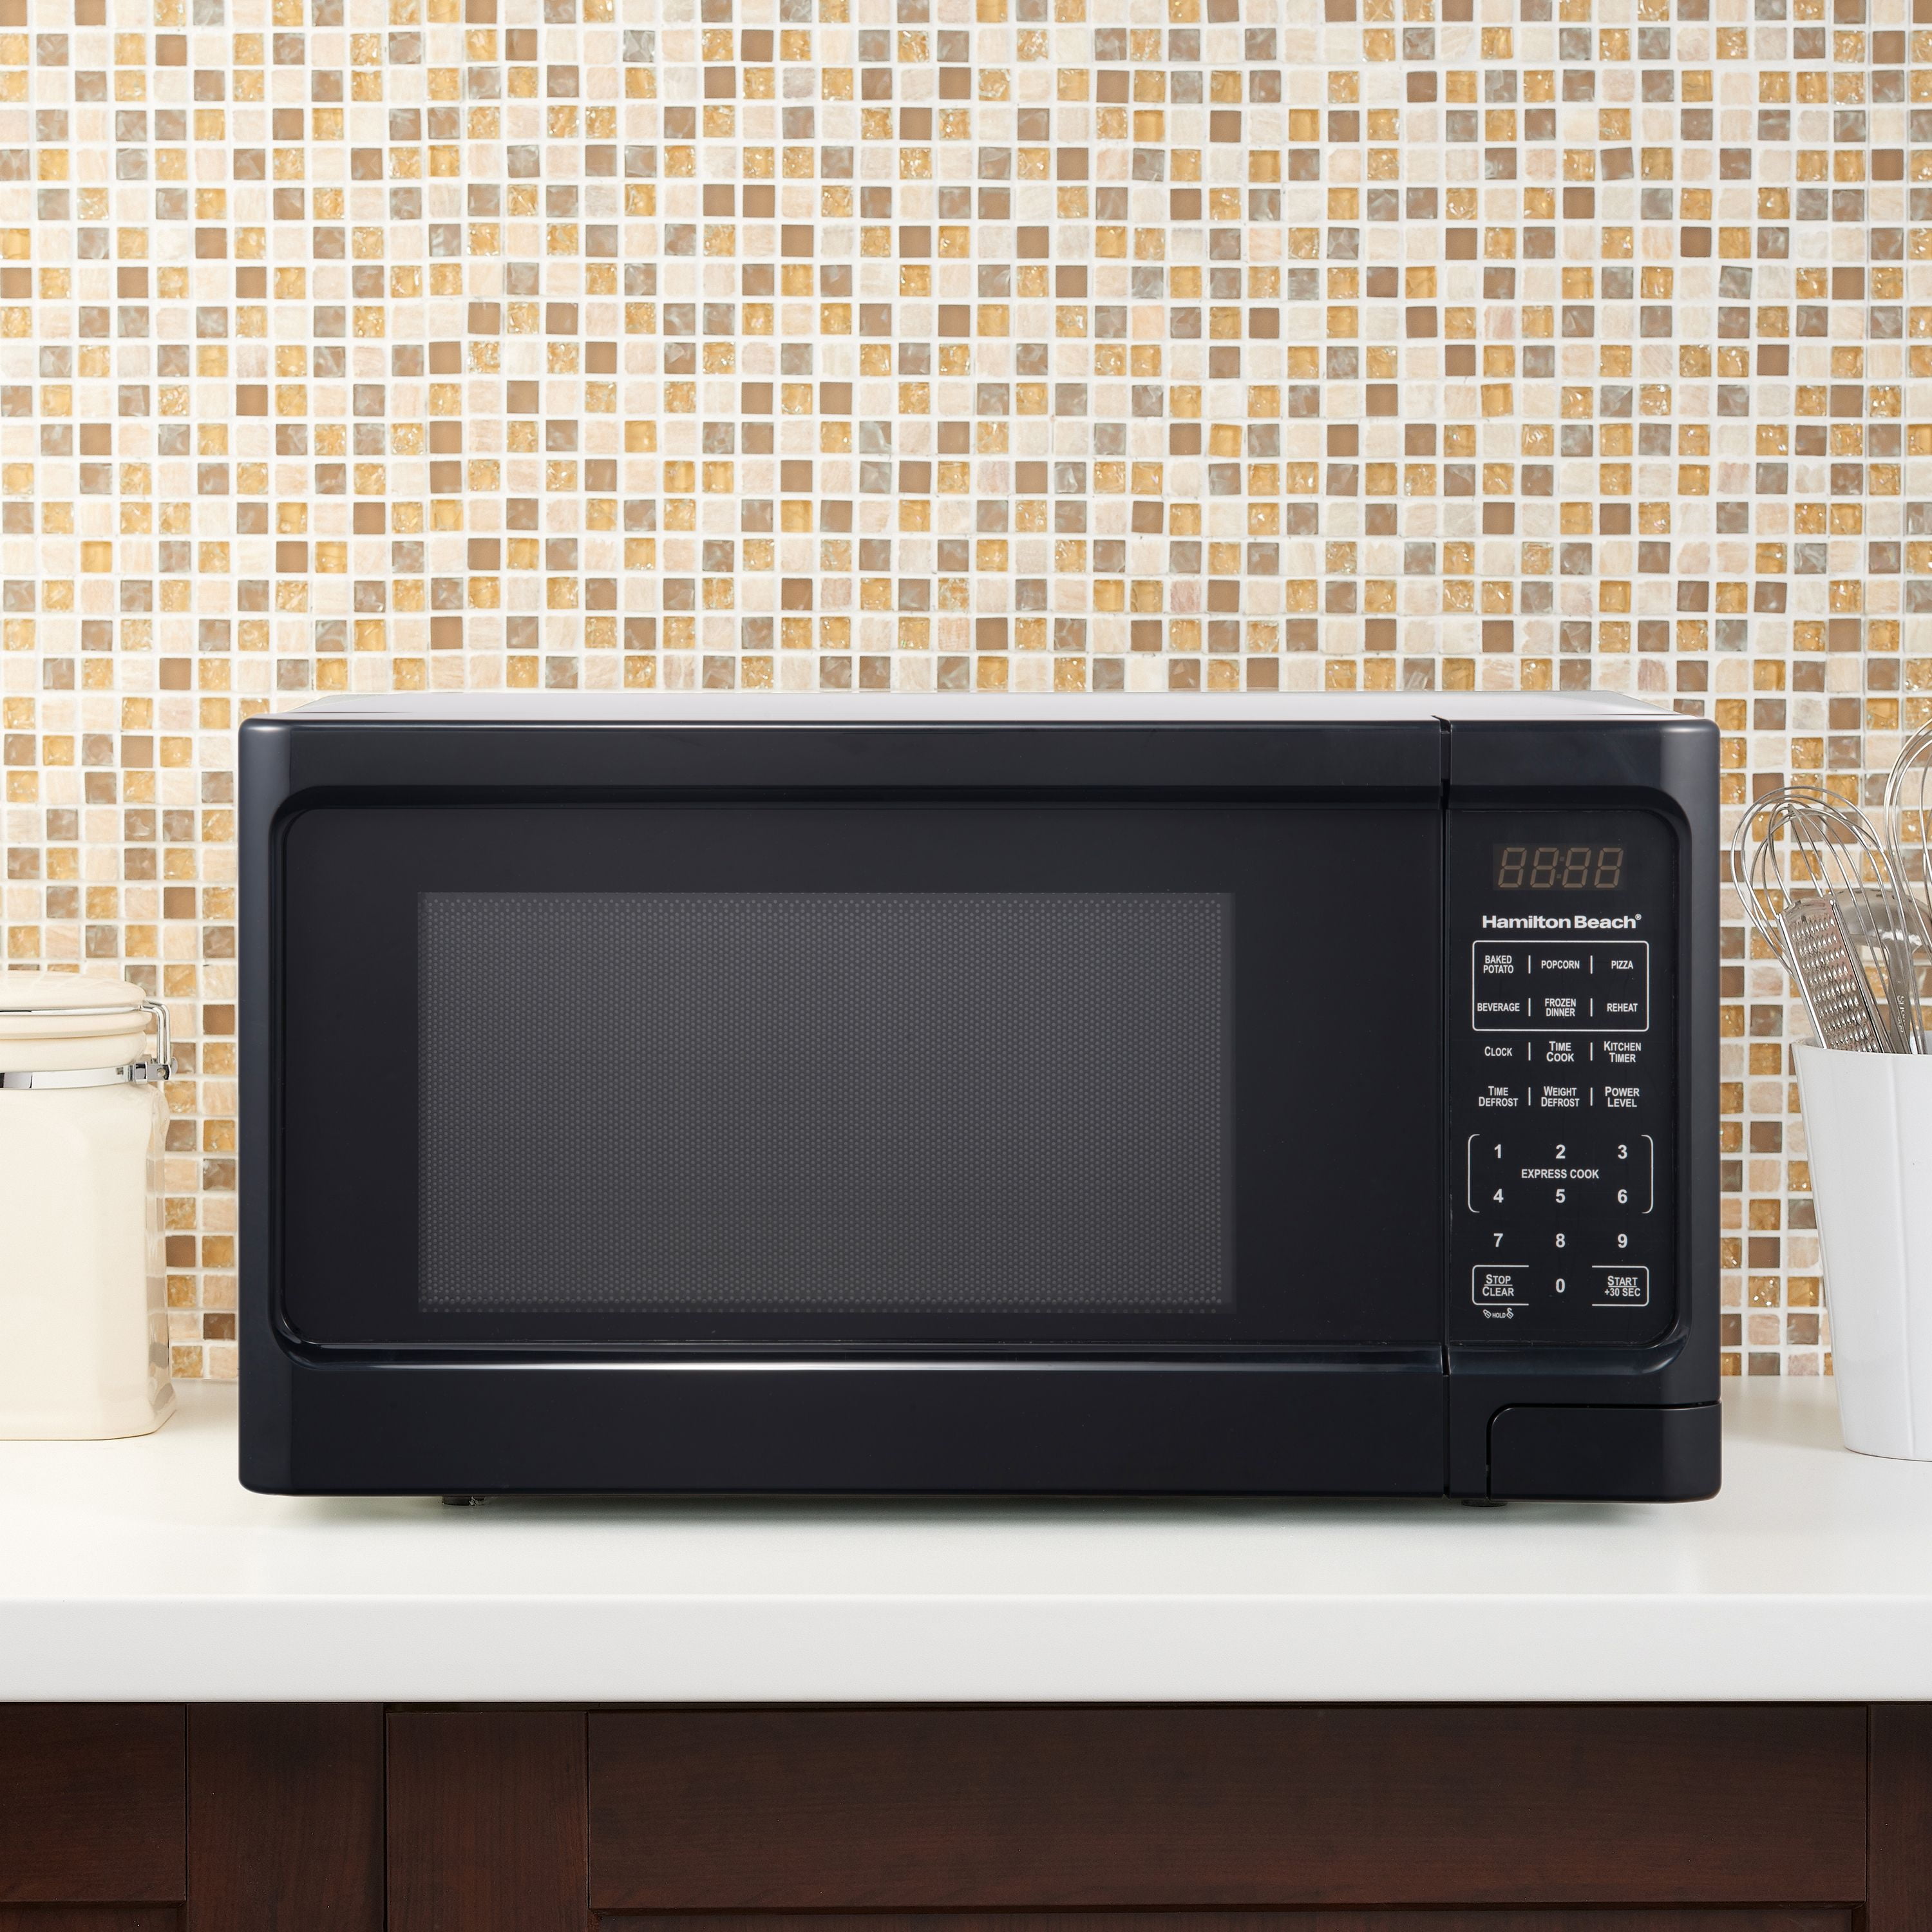 Hamilton Beach Microwave Oven model# HB-P100N3OAL-S3 for